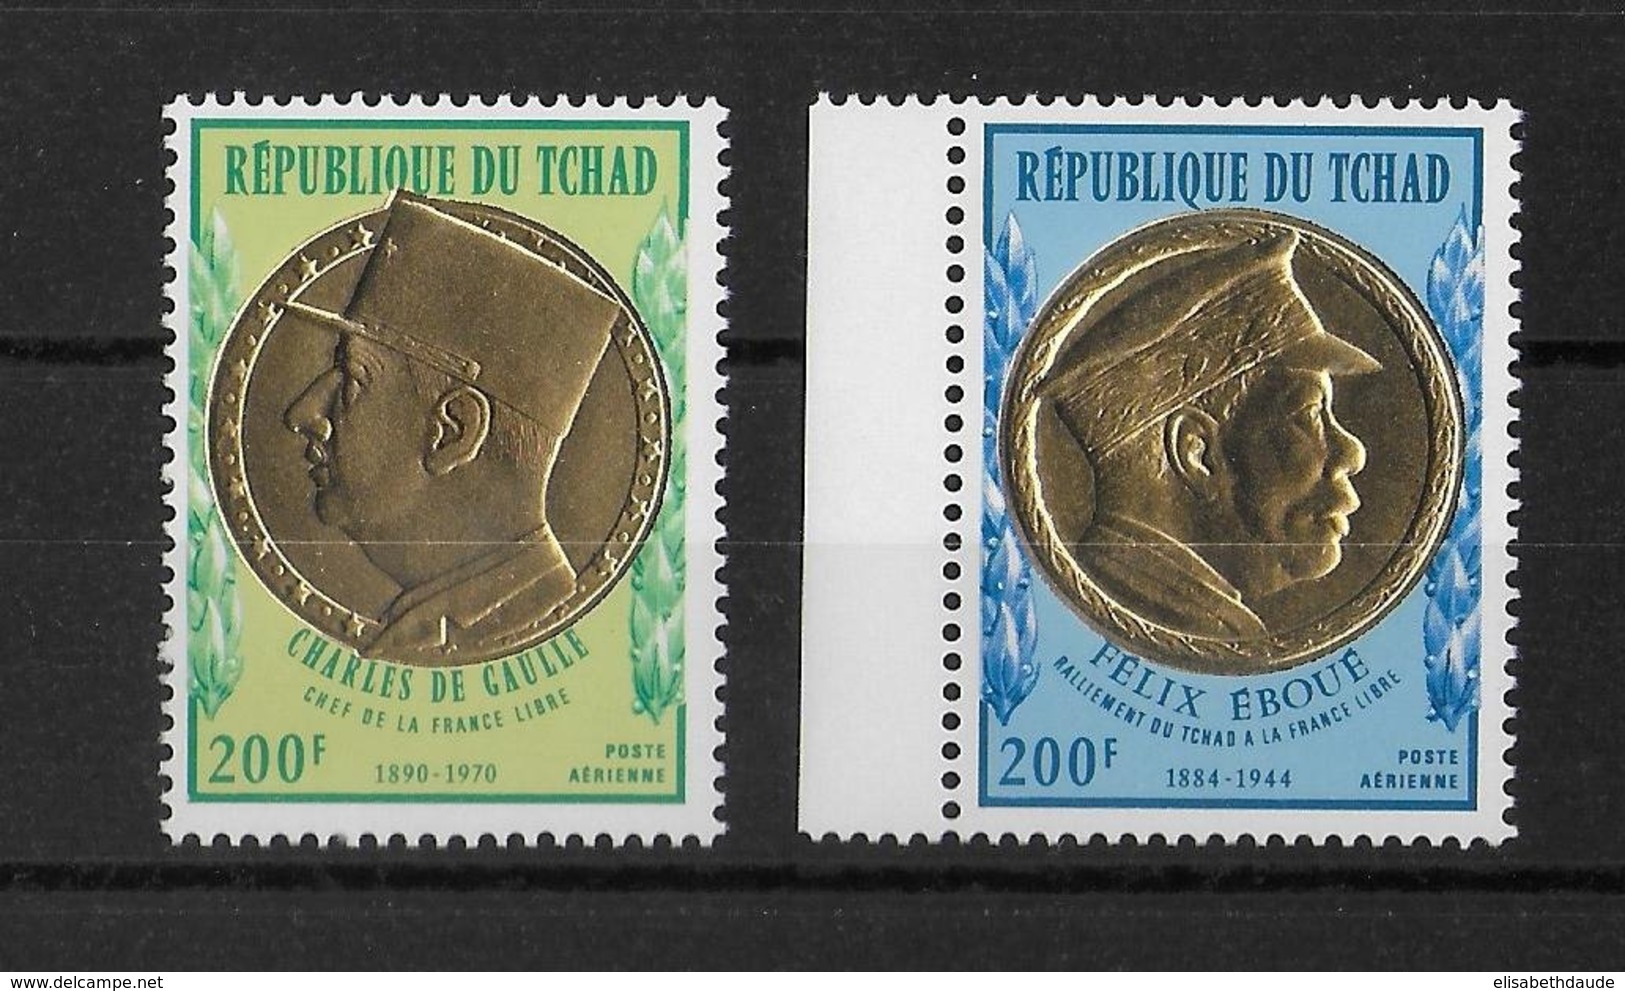 TCHAD - DE GAULLE ET EBOUE - TIMBRES OR GOLD -  YVERT A96/97 ** MNH - - Chad (1960-...)